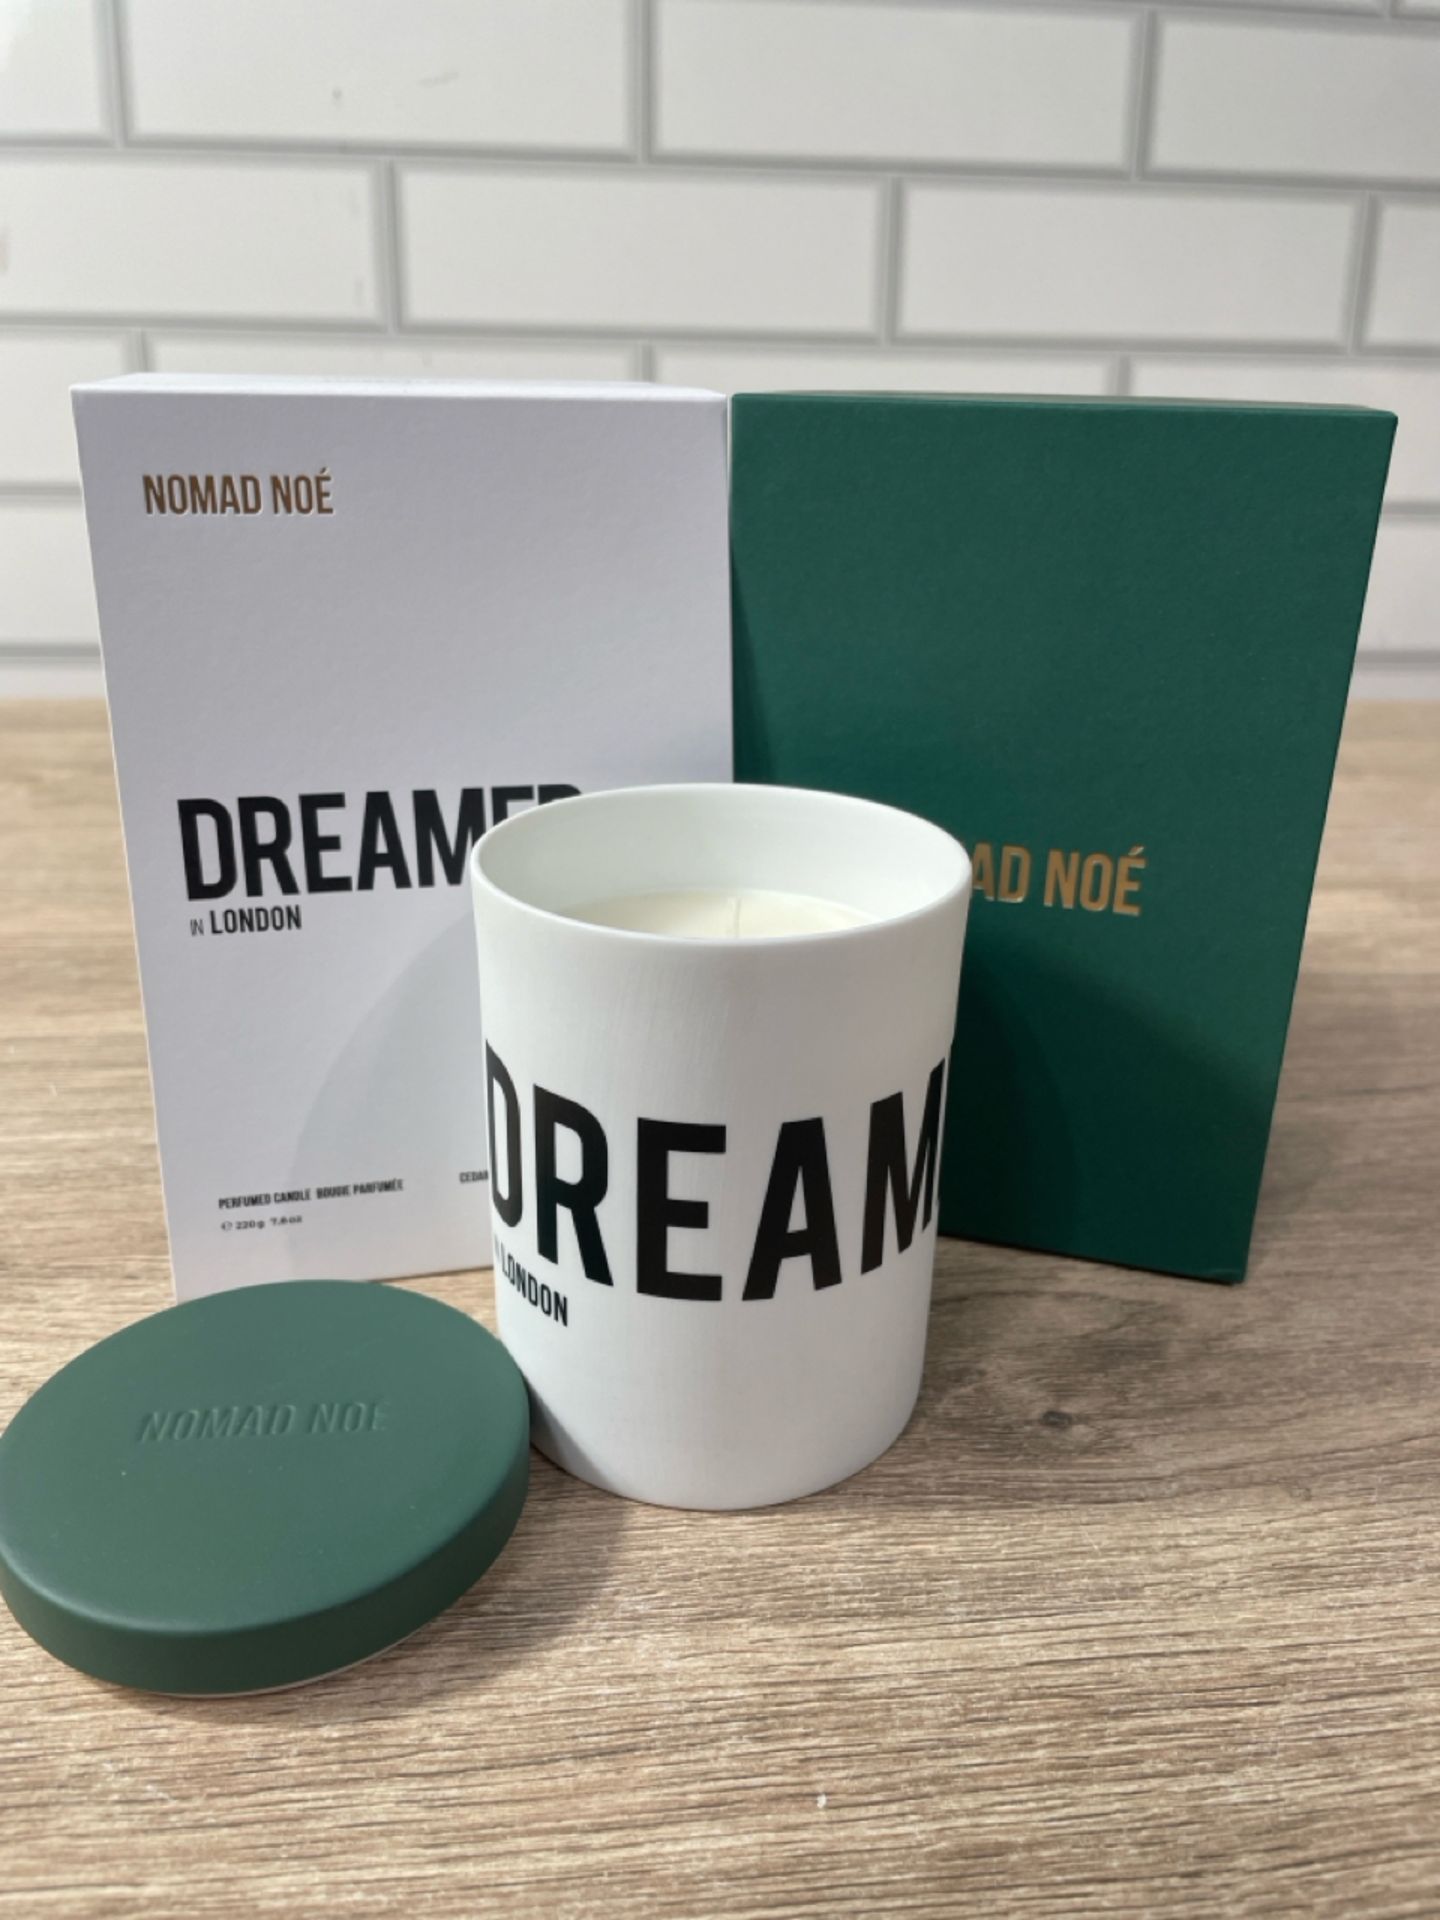 Dreamer Scented Candle from Nomad Noe - Bild 3 aus 4